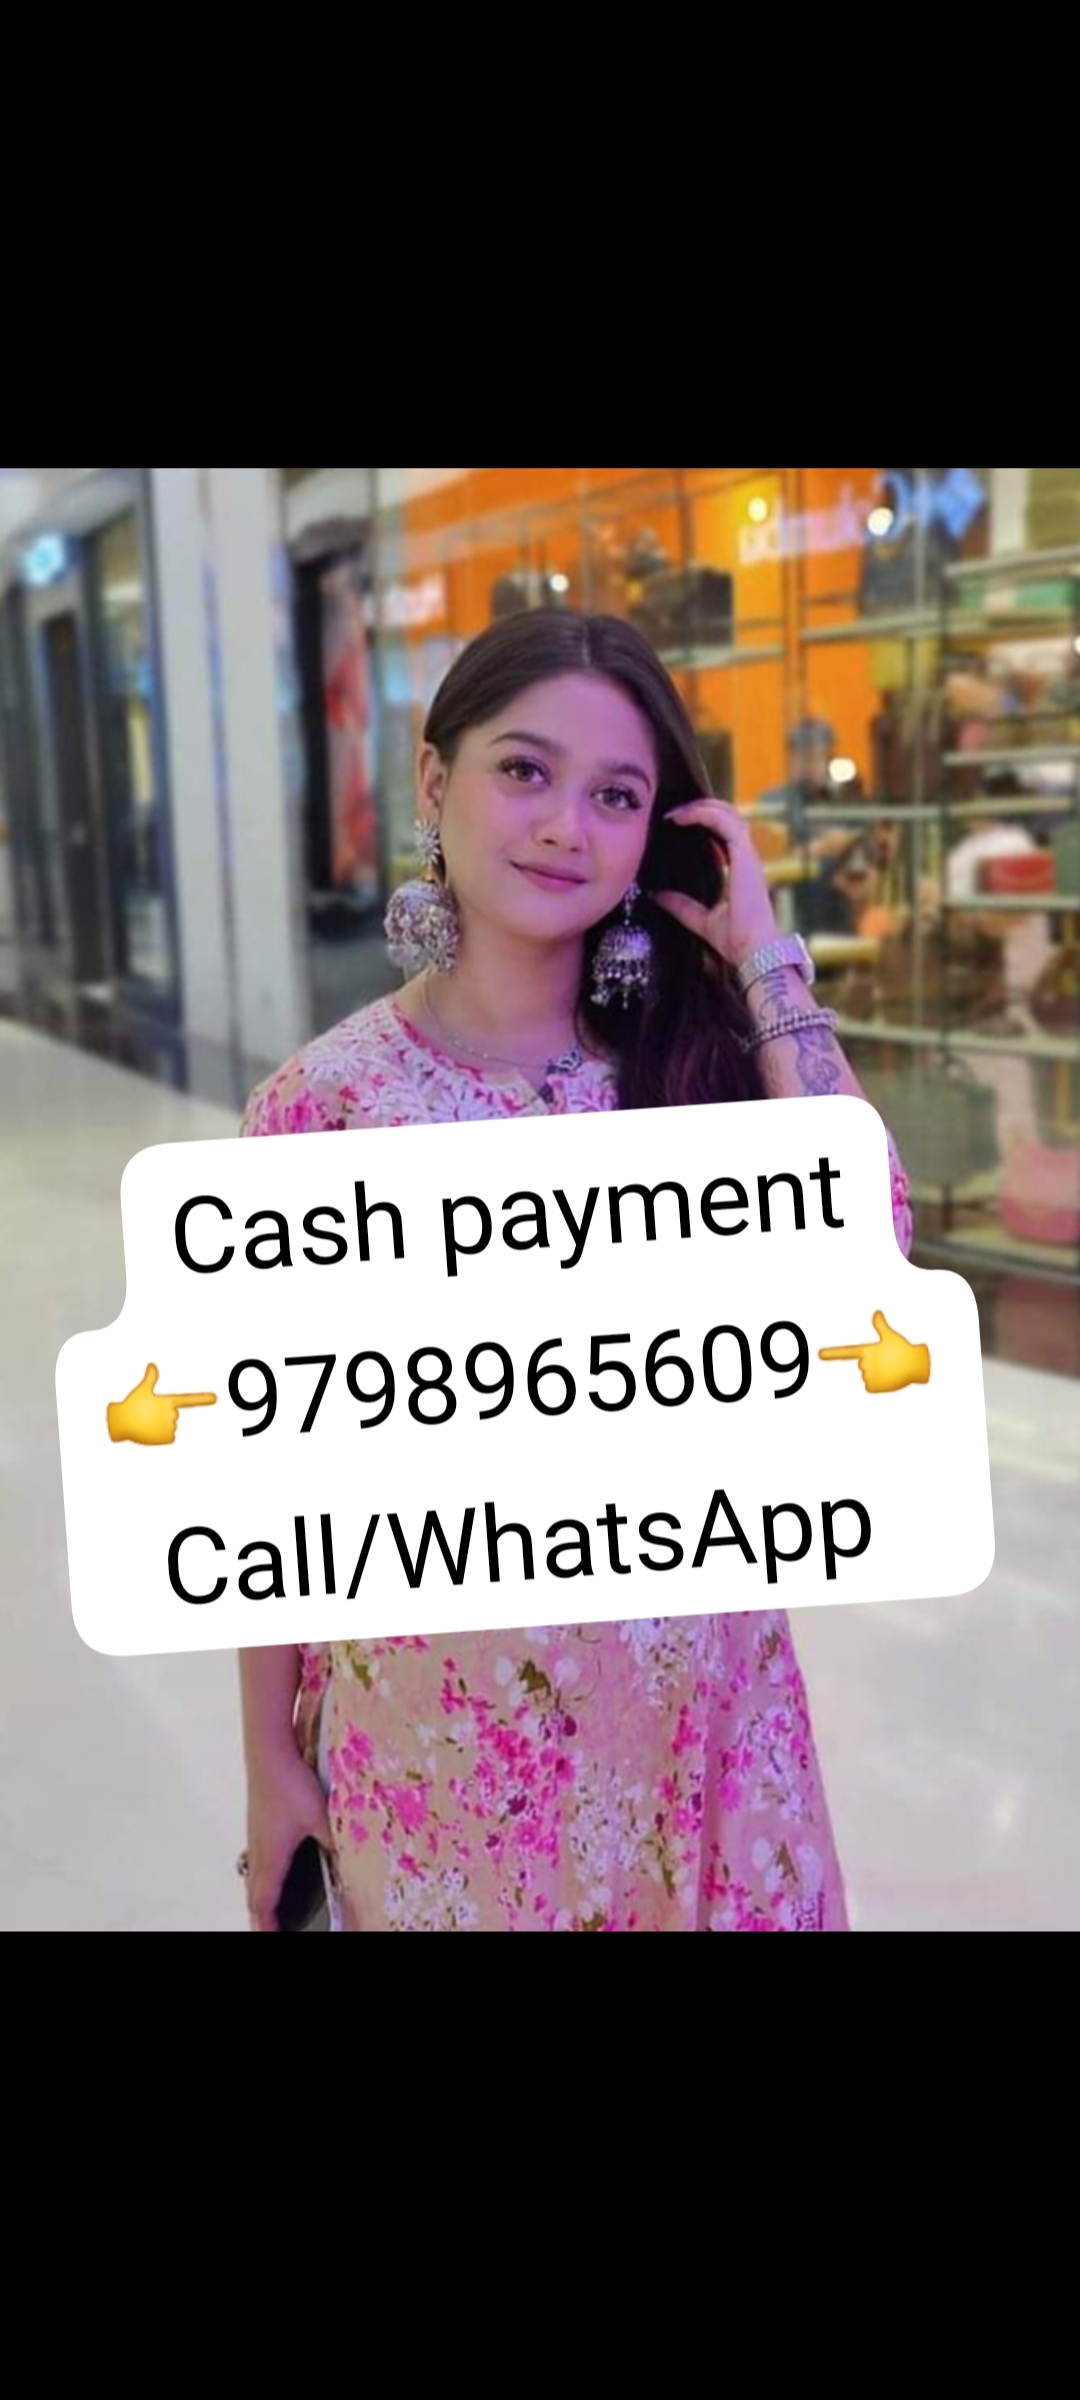 Aundh in high profile call girl full sucking anal sex cash payment 